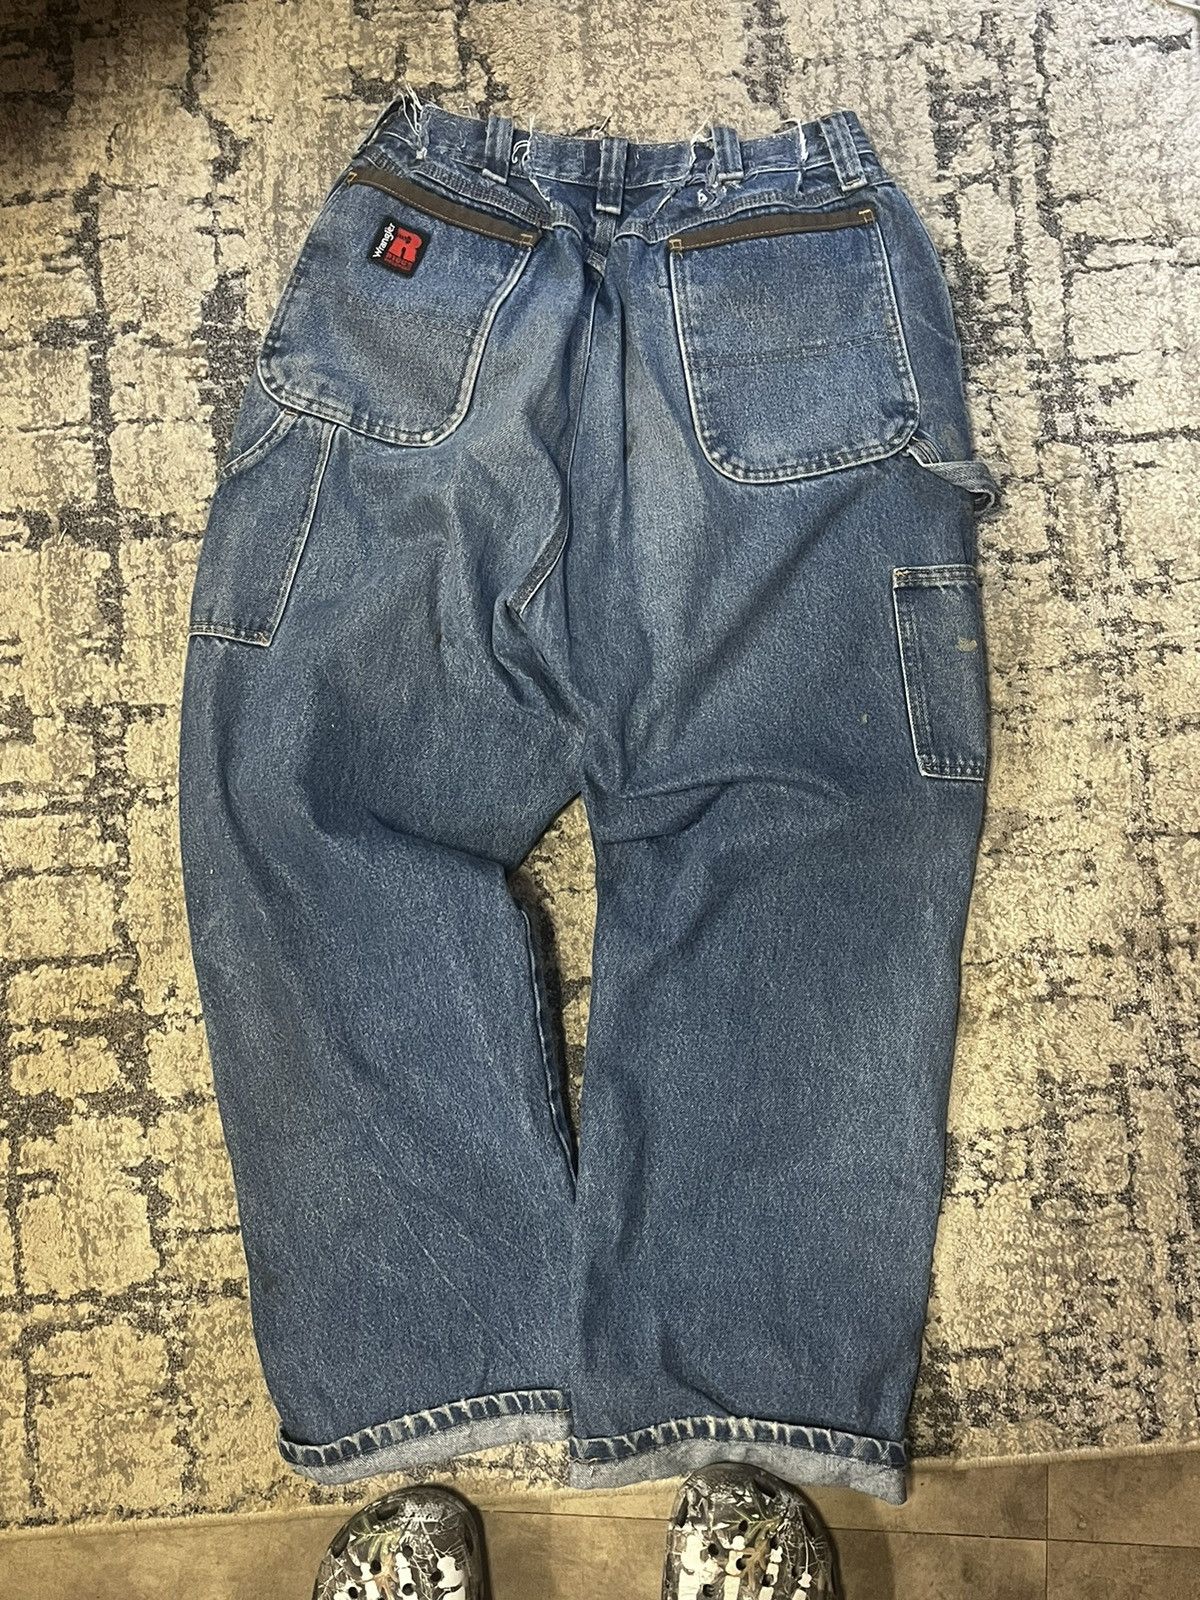 Vintage DOUBLE KNEE BAGGY WRANGLERS Size US 32 / EU 48 - 2 Preview